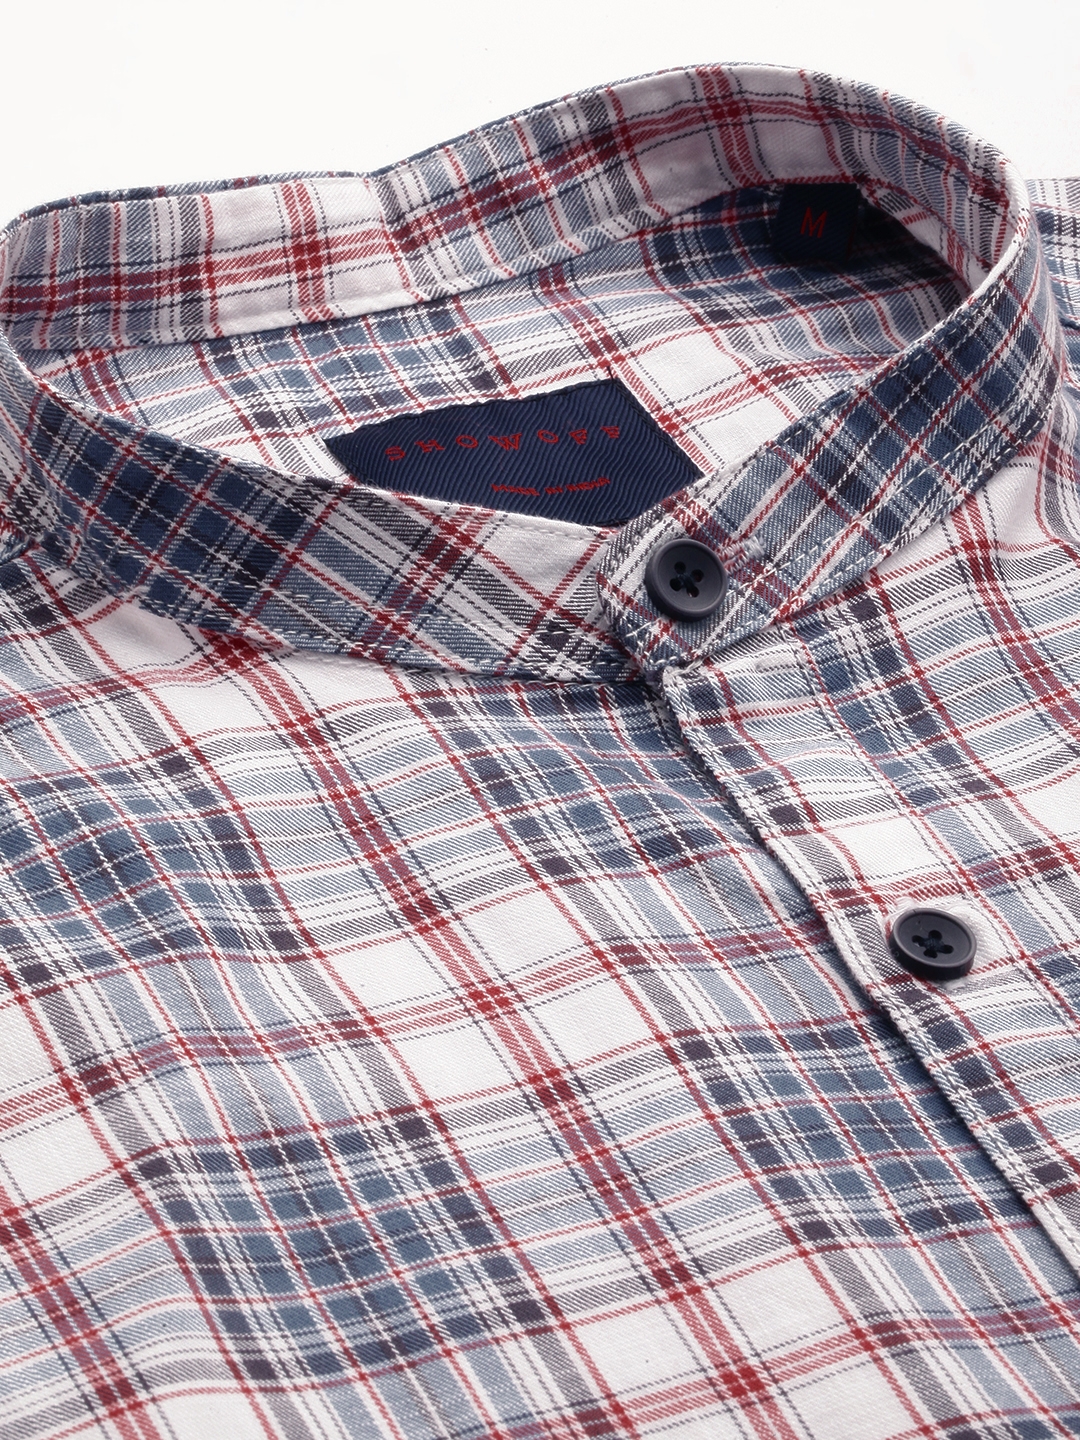 Men's White Cotton Checked Casual Shirts